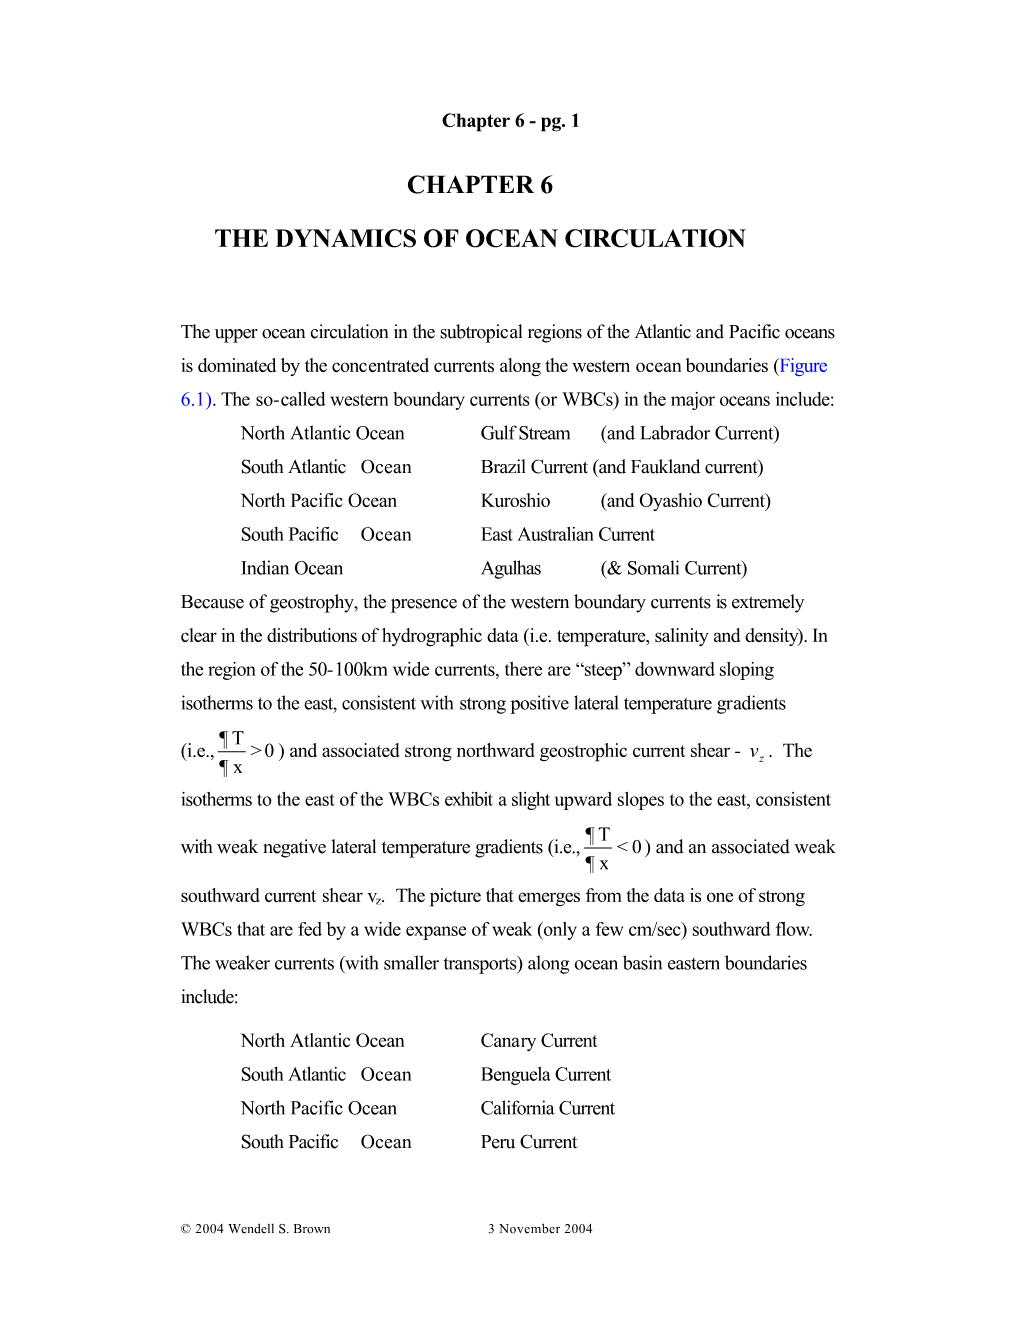 Chapter 6 the Dynamics of Ocean Circulation